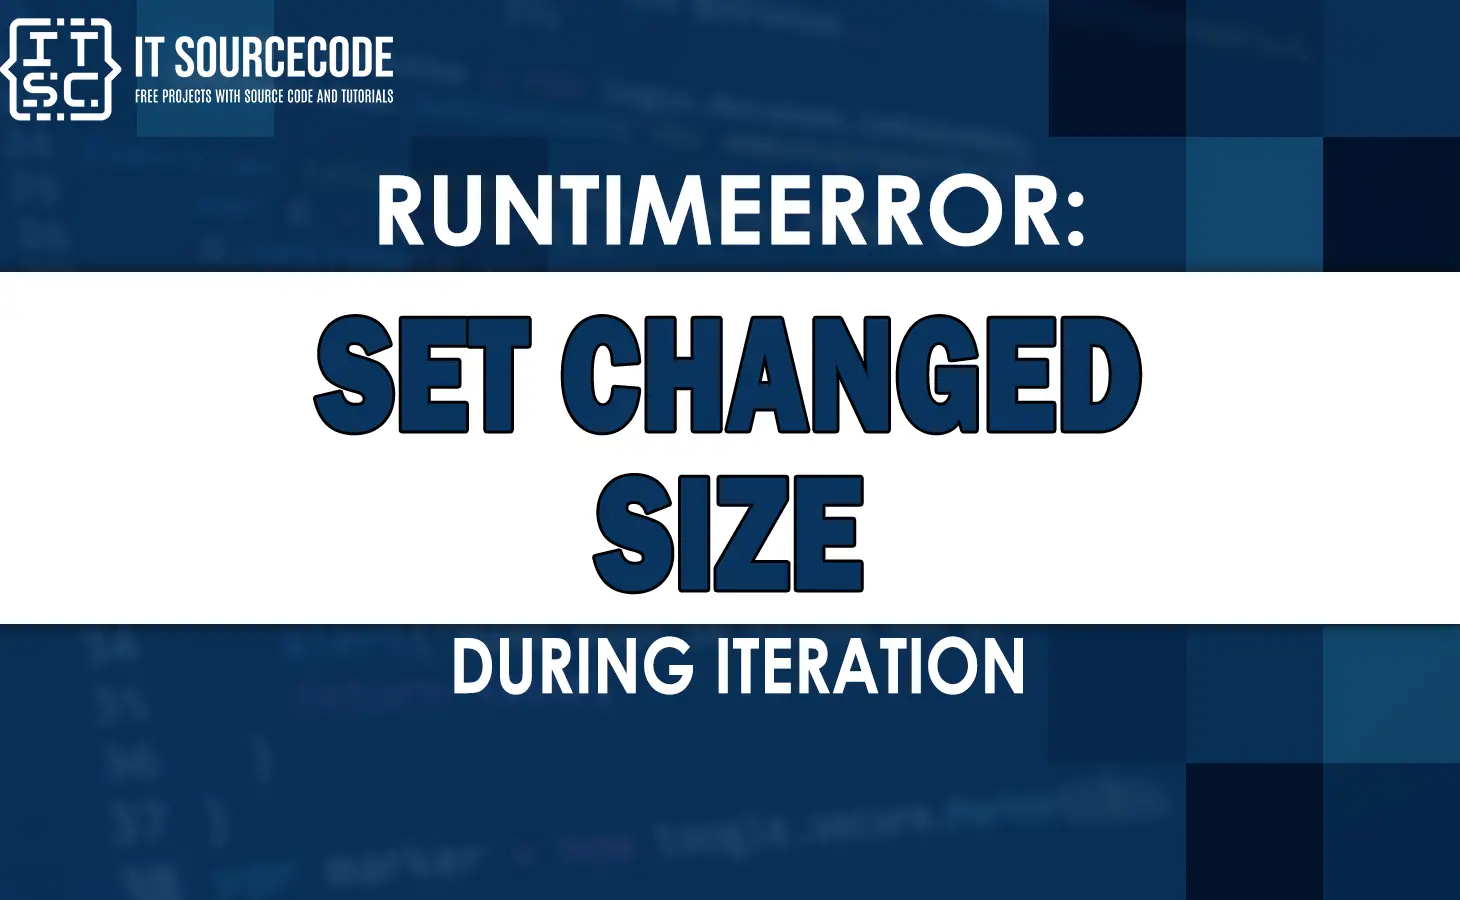 Runtimeerror set changed size during iteration